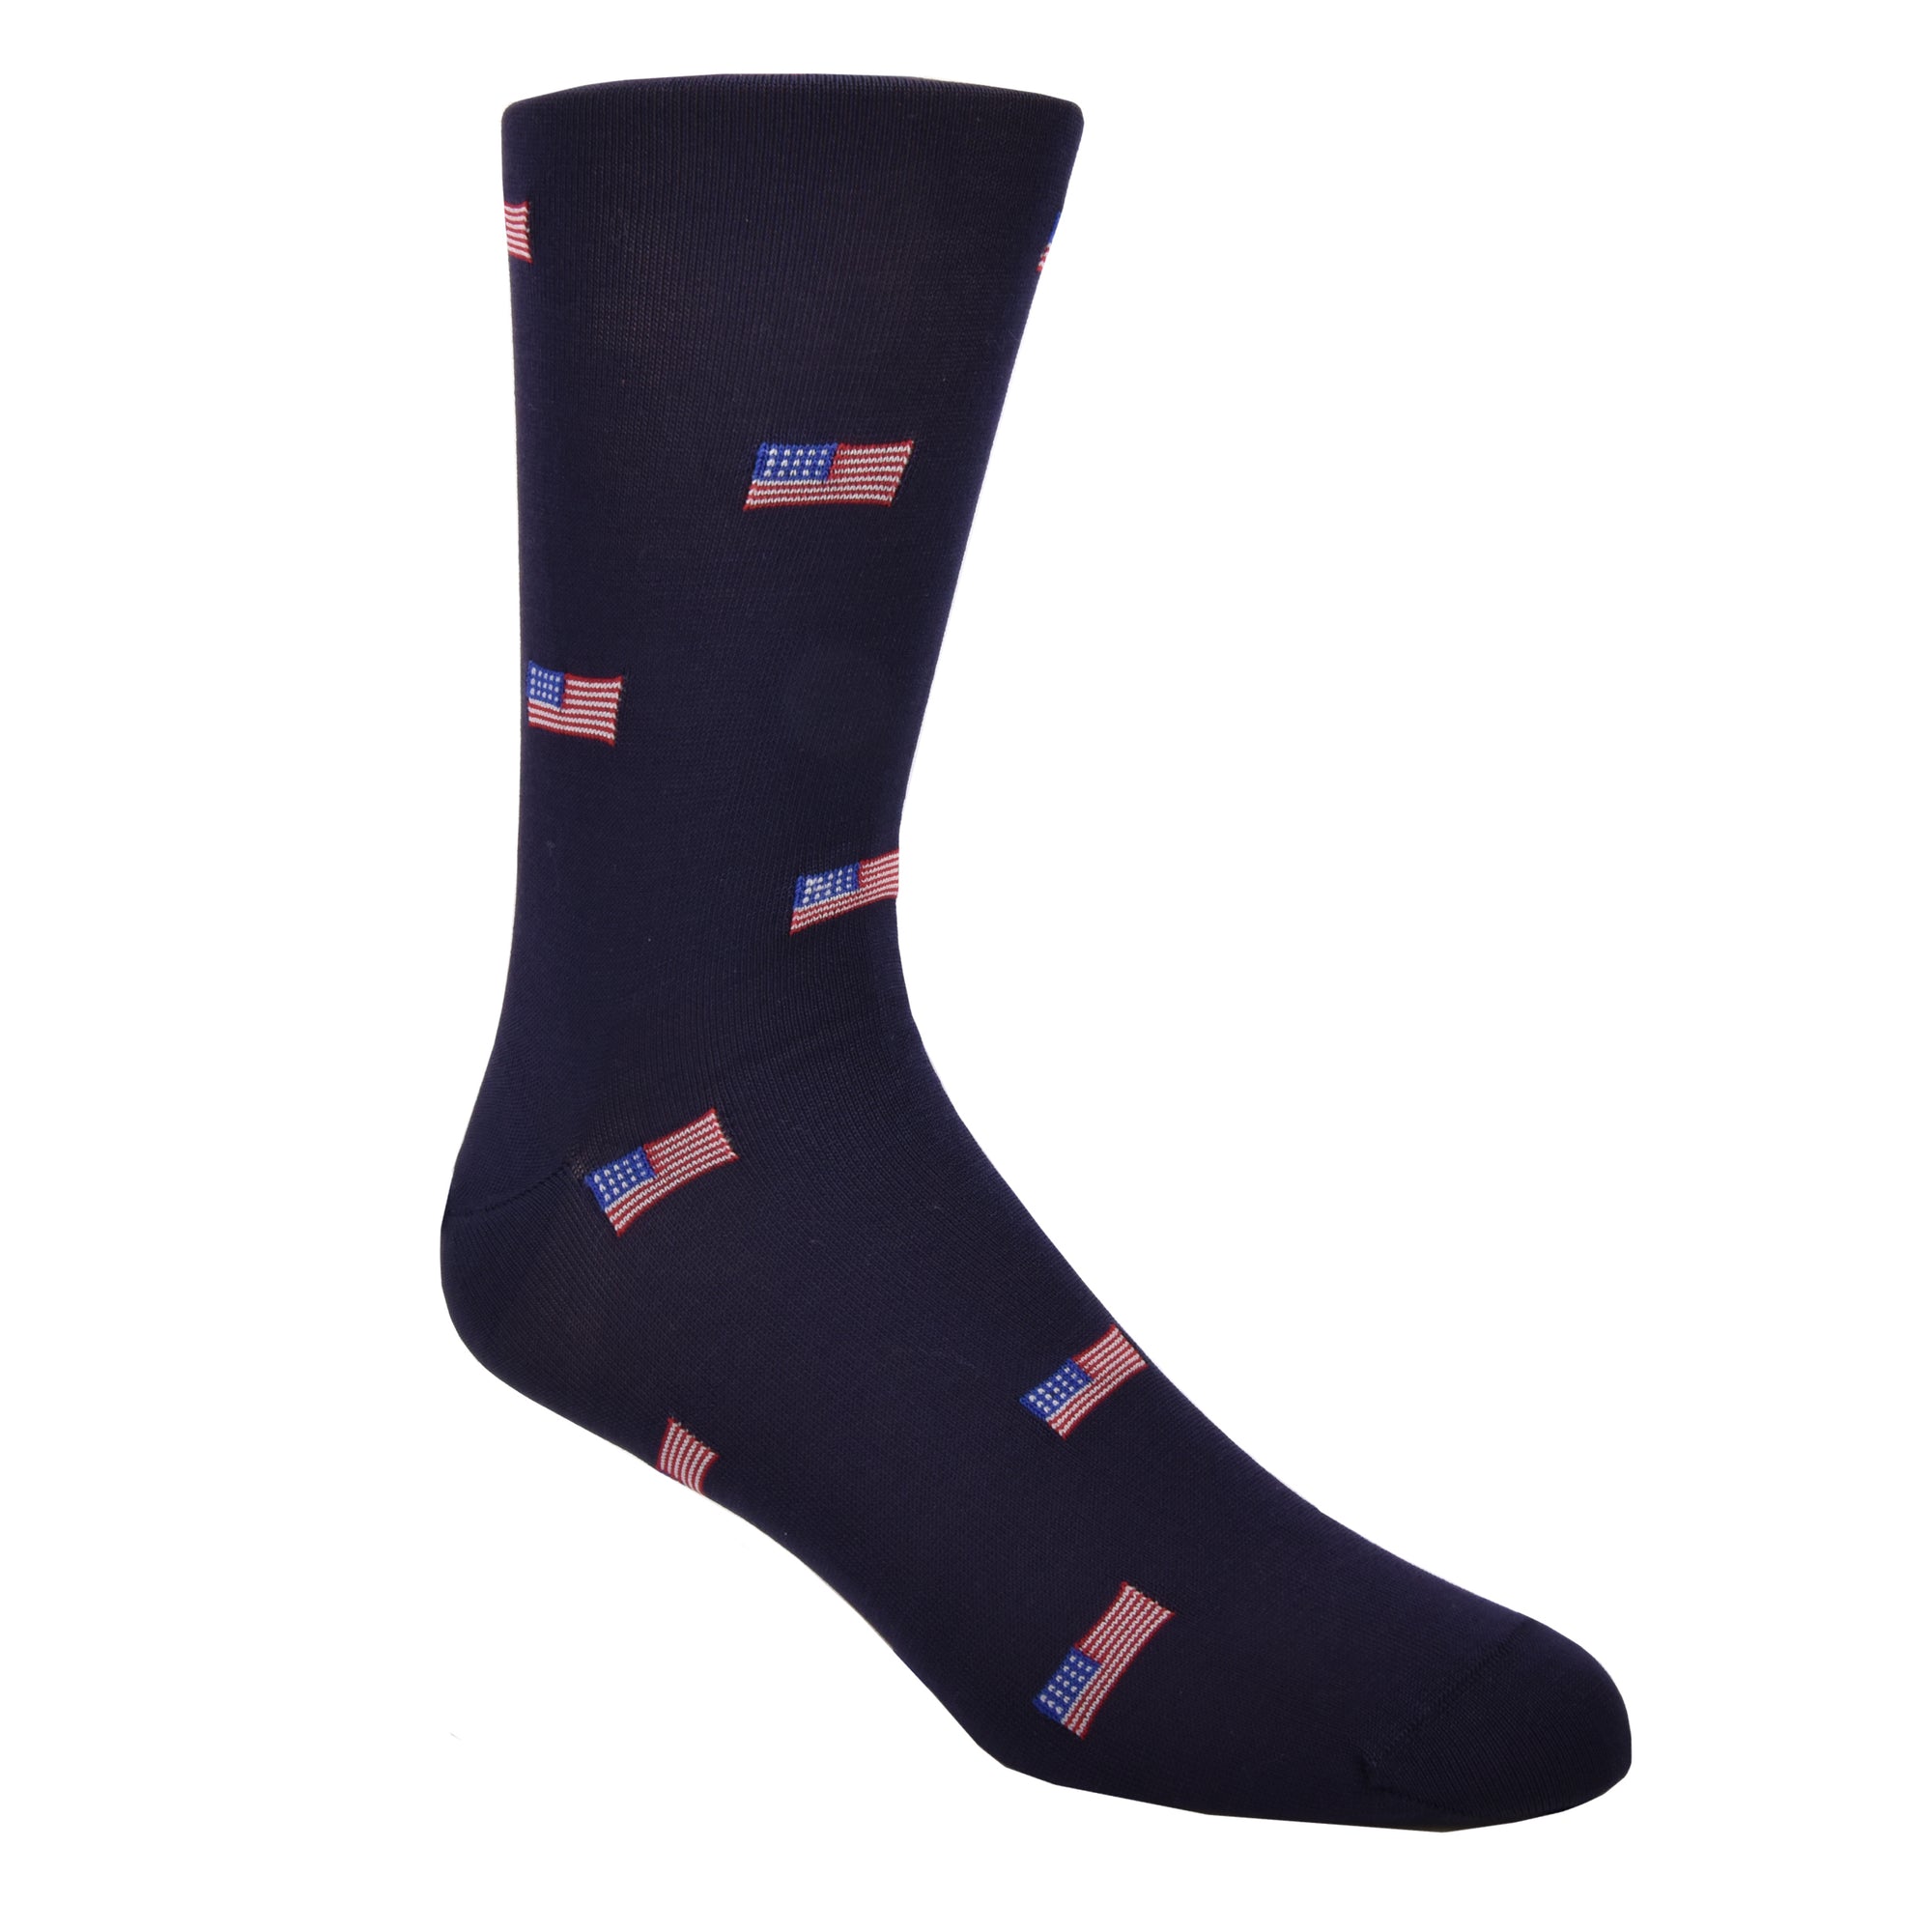 Represent your land of the free and home of the brave. Life is too short to wear boring socks! #damnright  70% Mercerized Cotton 29% Nylon 1% Spandex Fits Size 8-12 Machine Washable Made in the USA